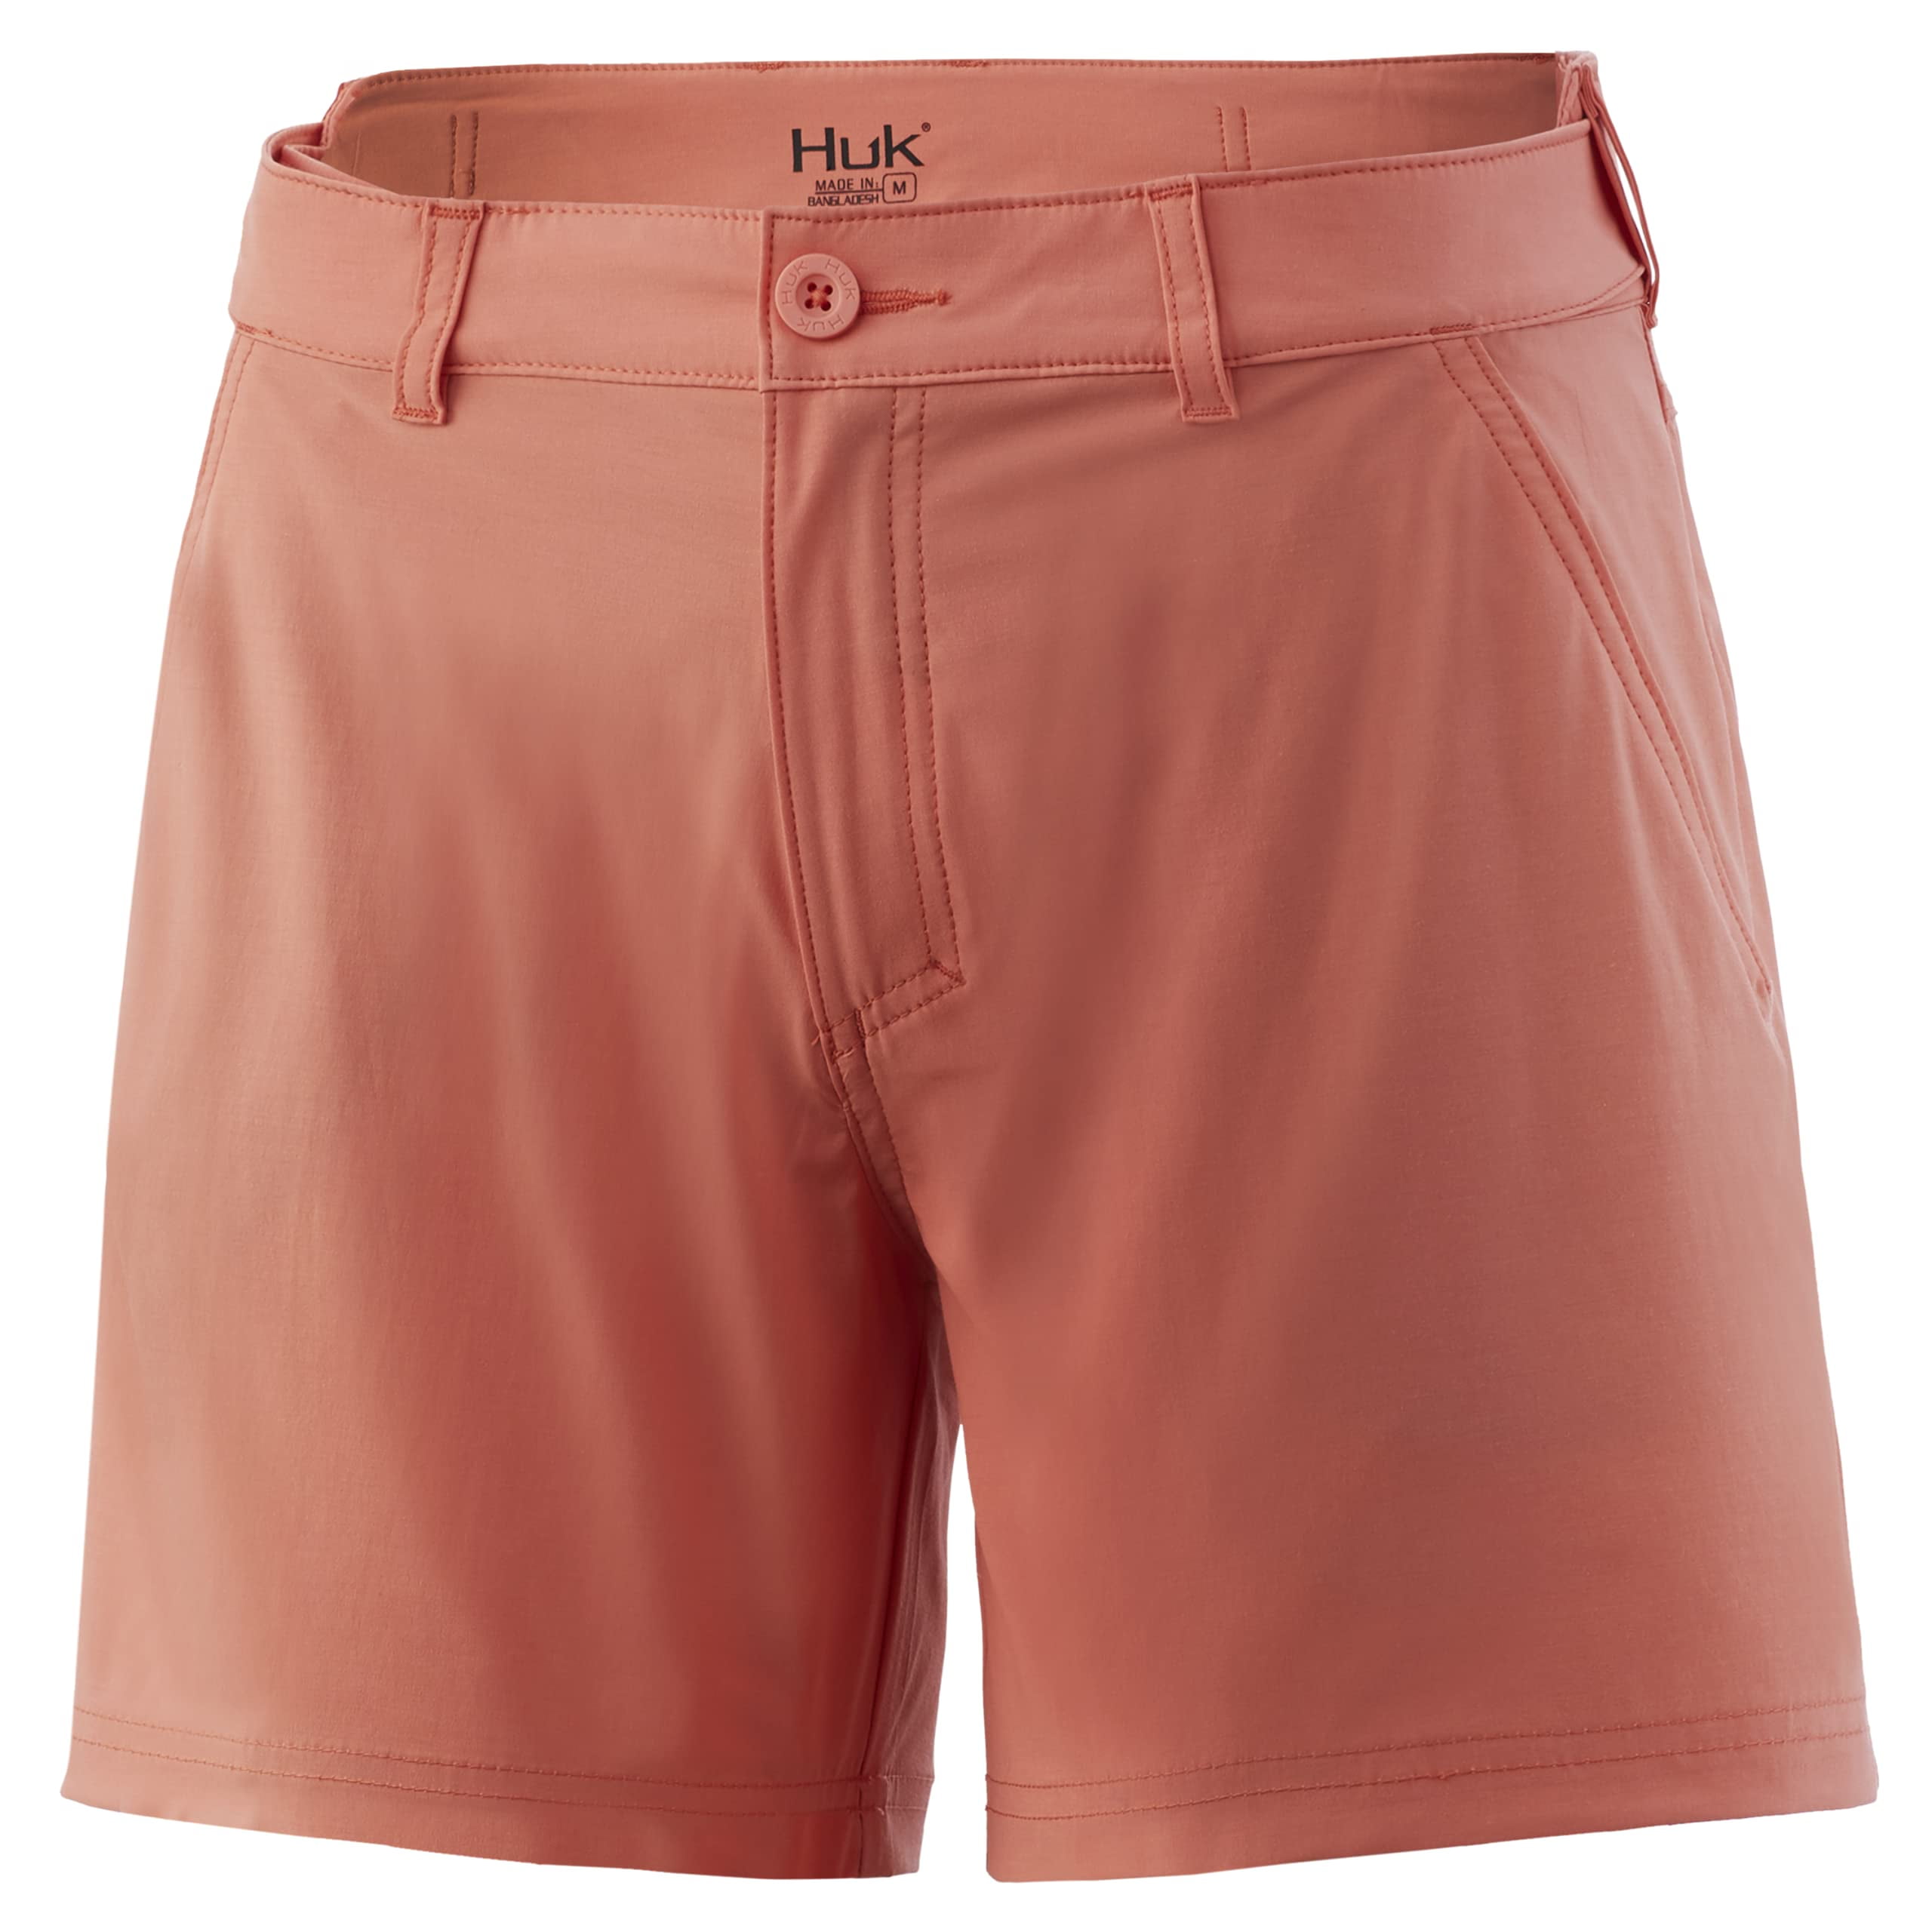 Huk Women's Next Level Fusion Coral X-Small Quick Drying Performance Shorts